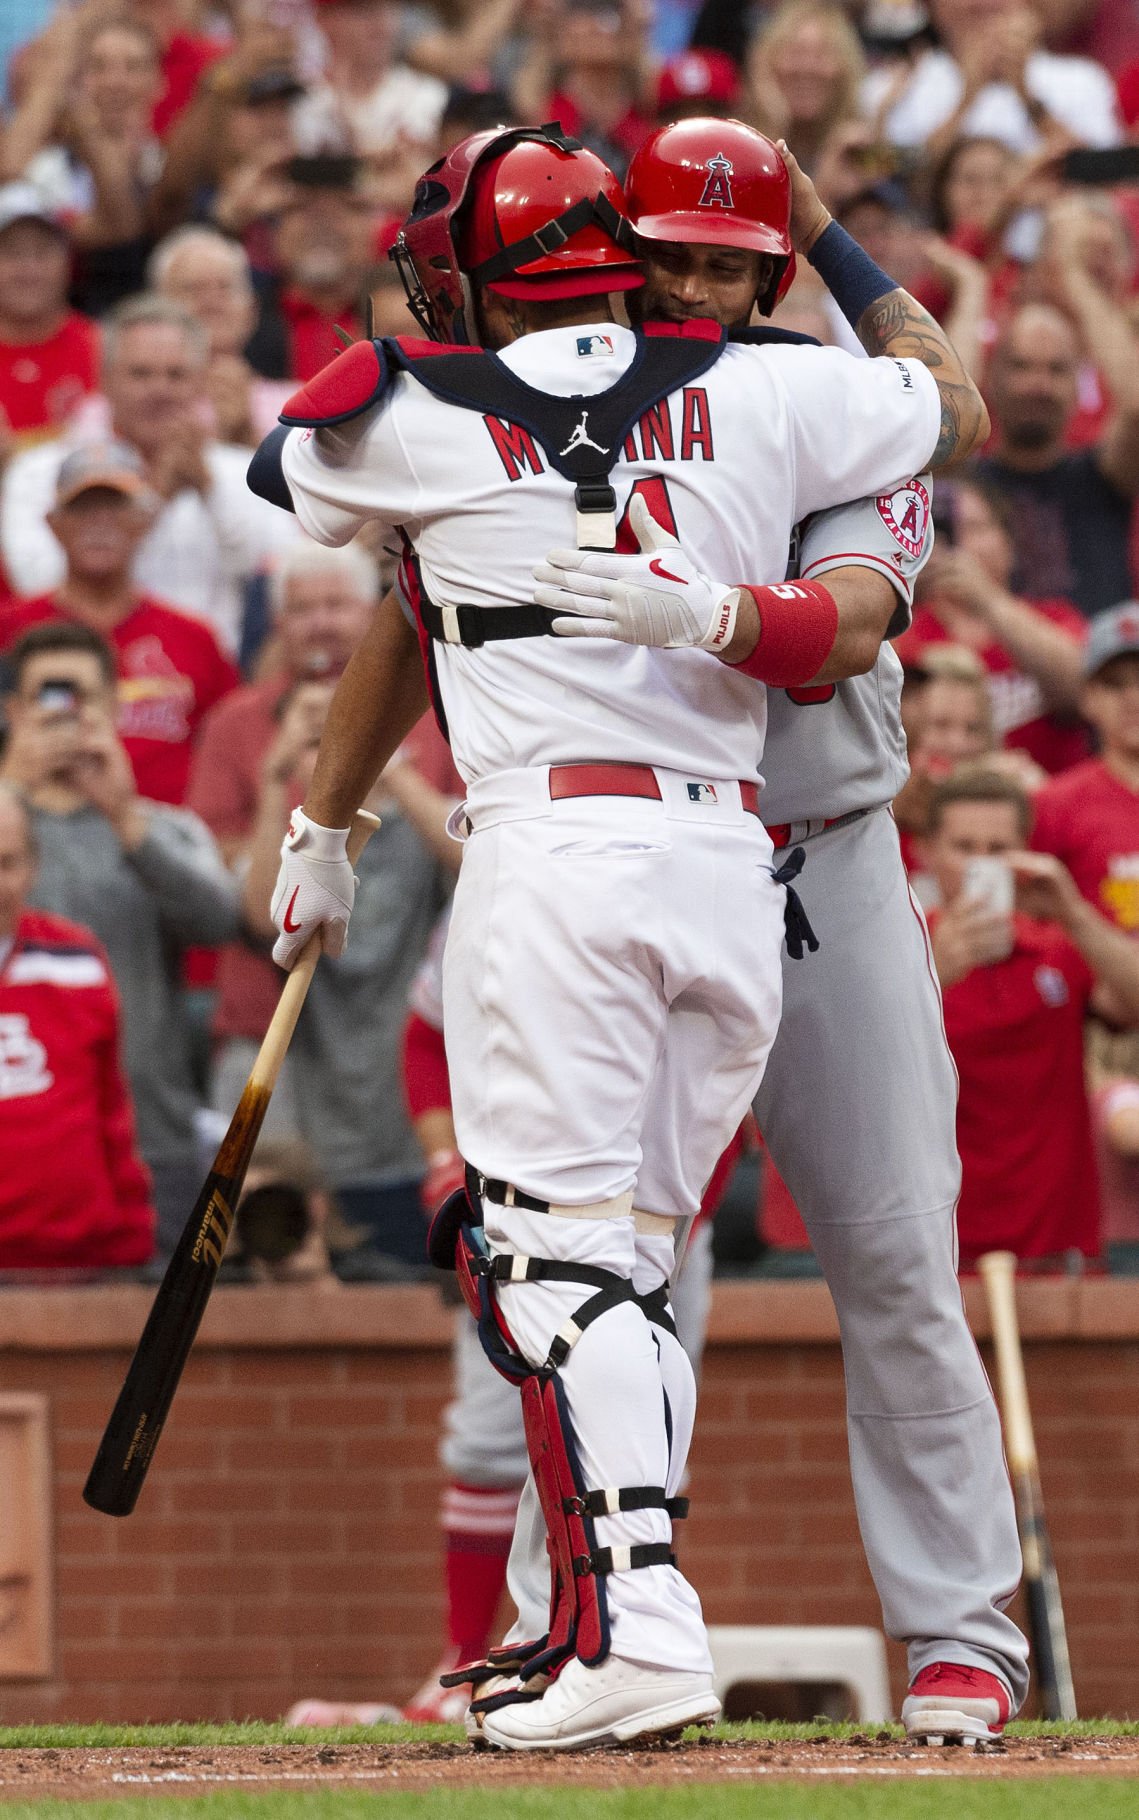 Cards fans salute Angels star Pujols in return to St. Louis | Baseball | wcy.wat.edu.pl